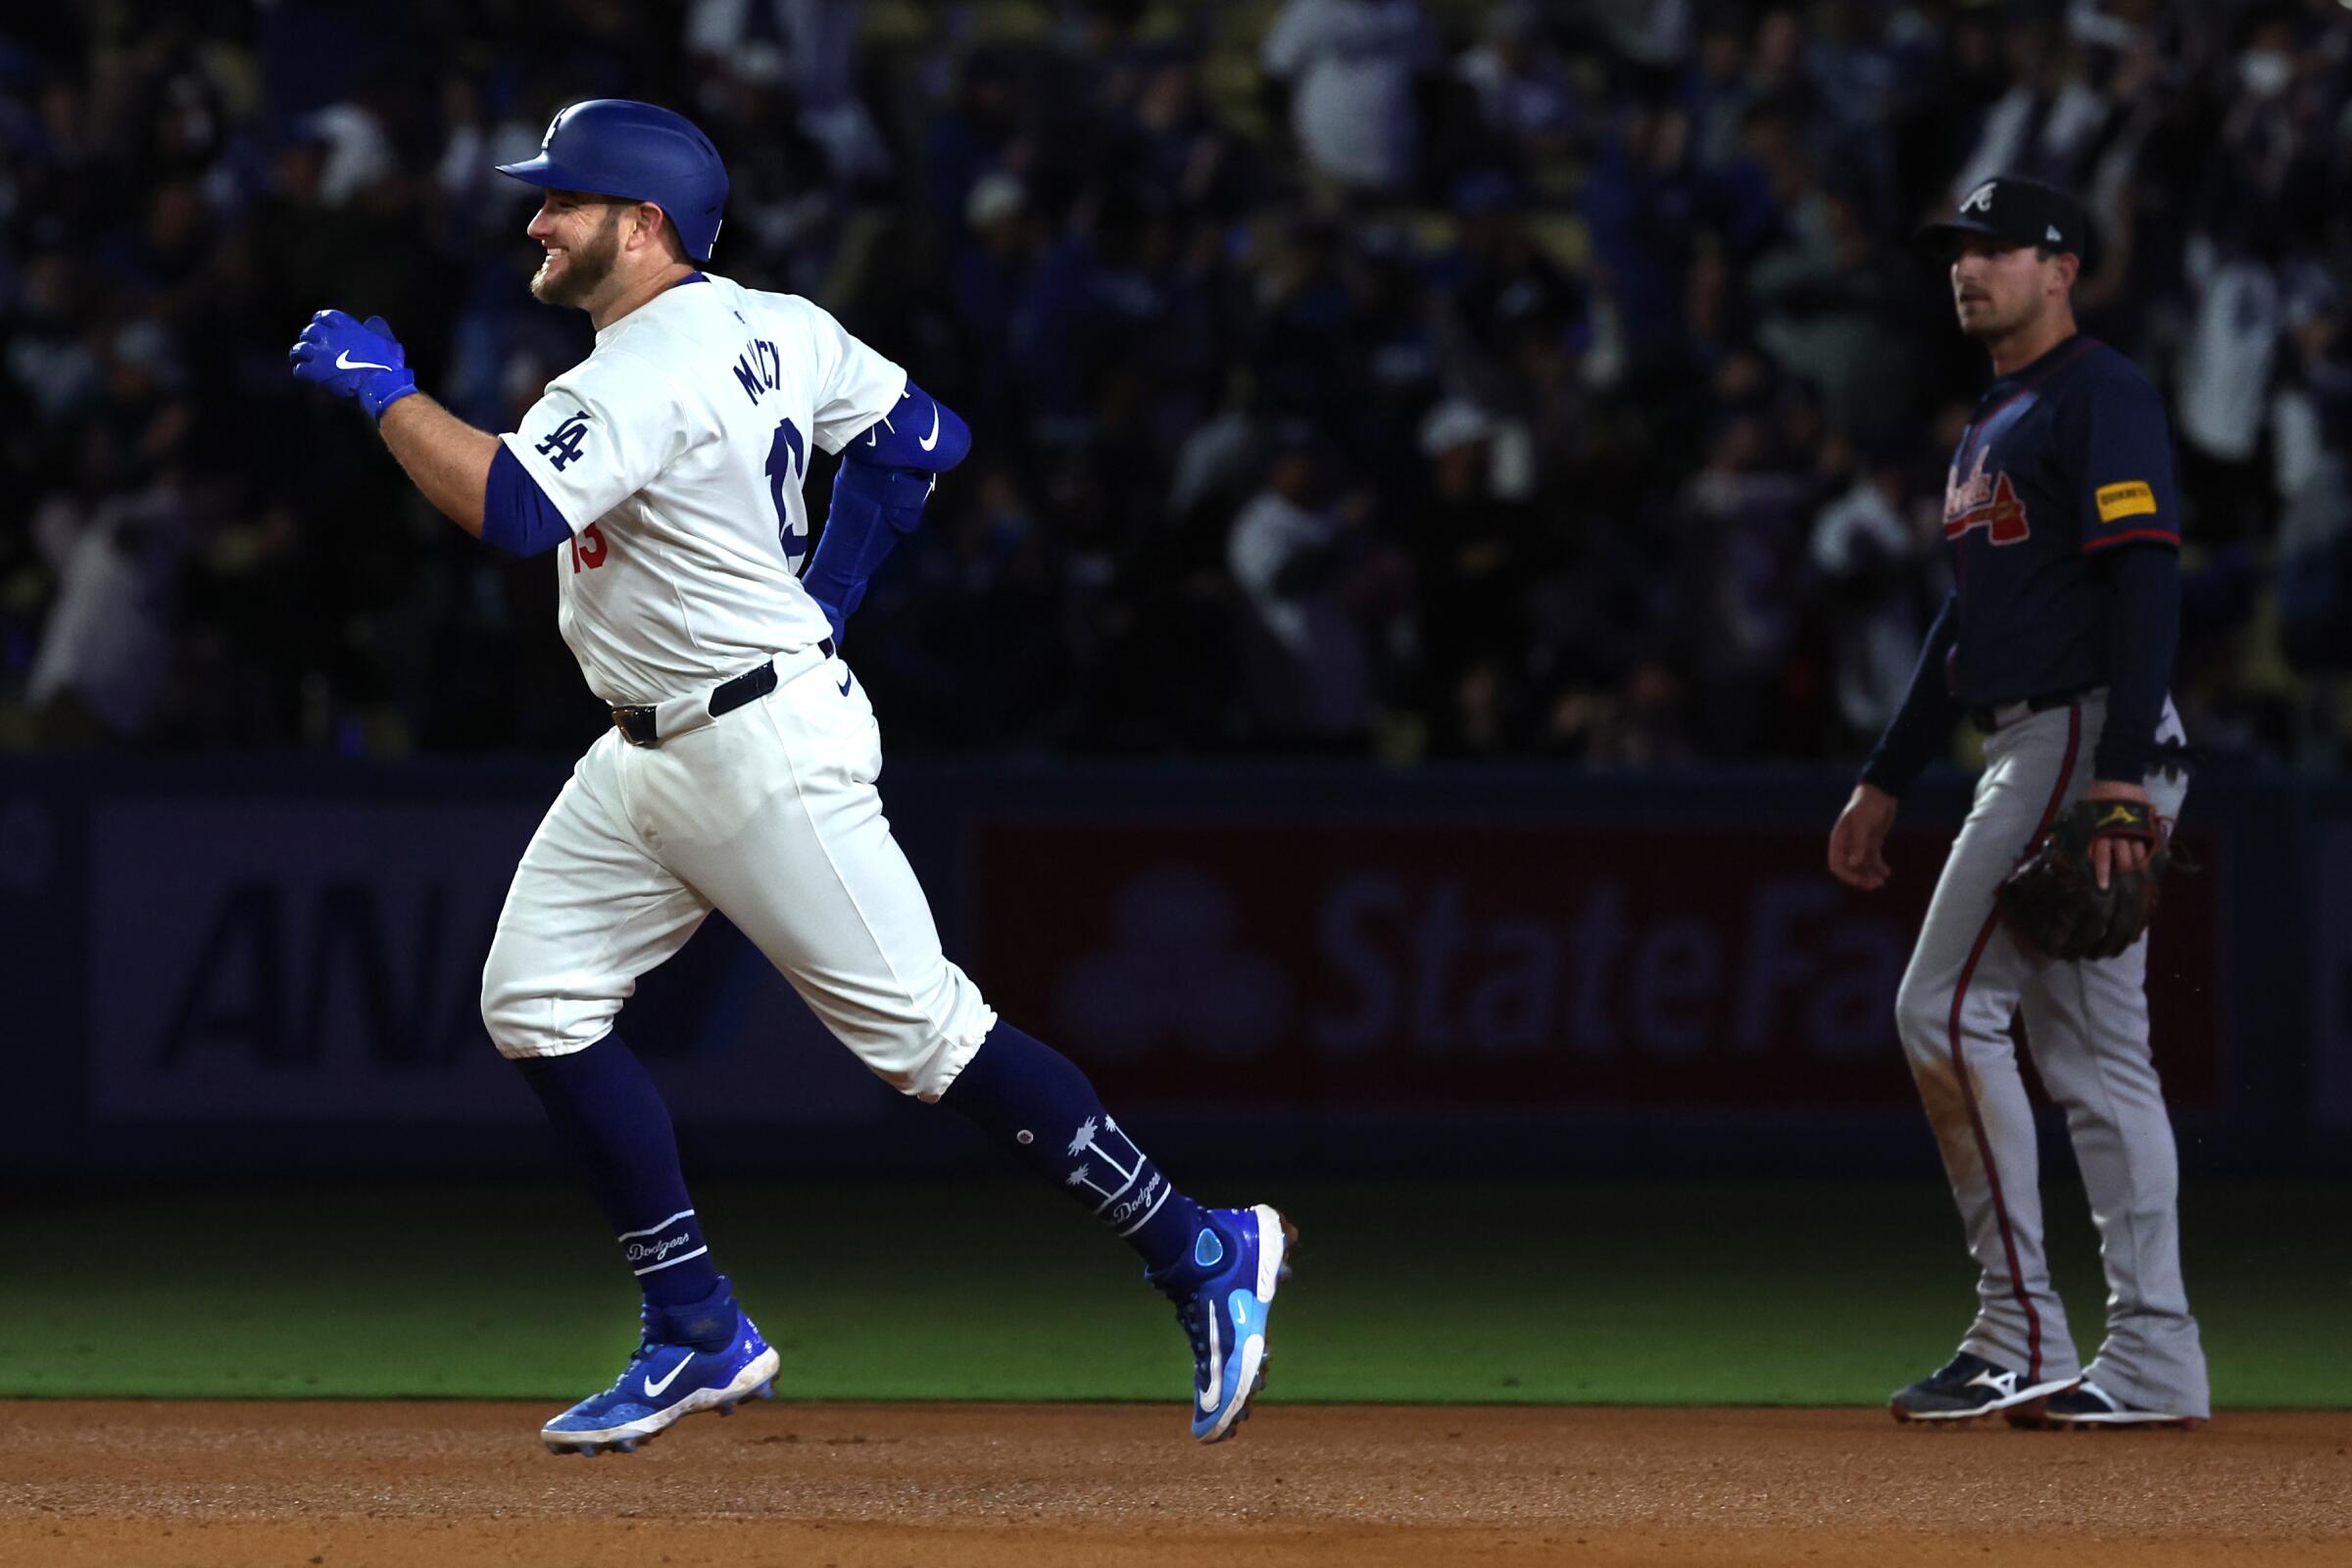 Max Muncy rounds the bases after hitting his third home run in the Dodgers' 11-2 win over the Atlanta Braves.